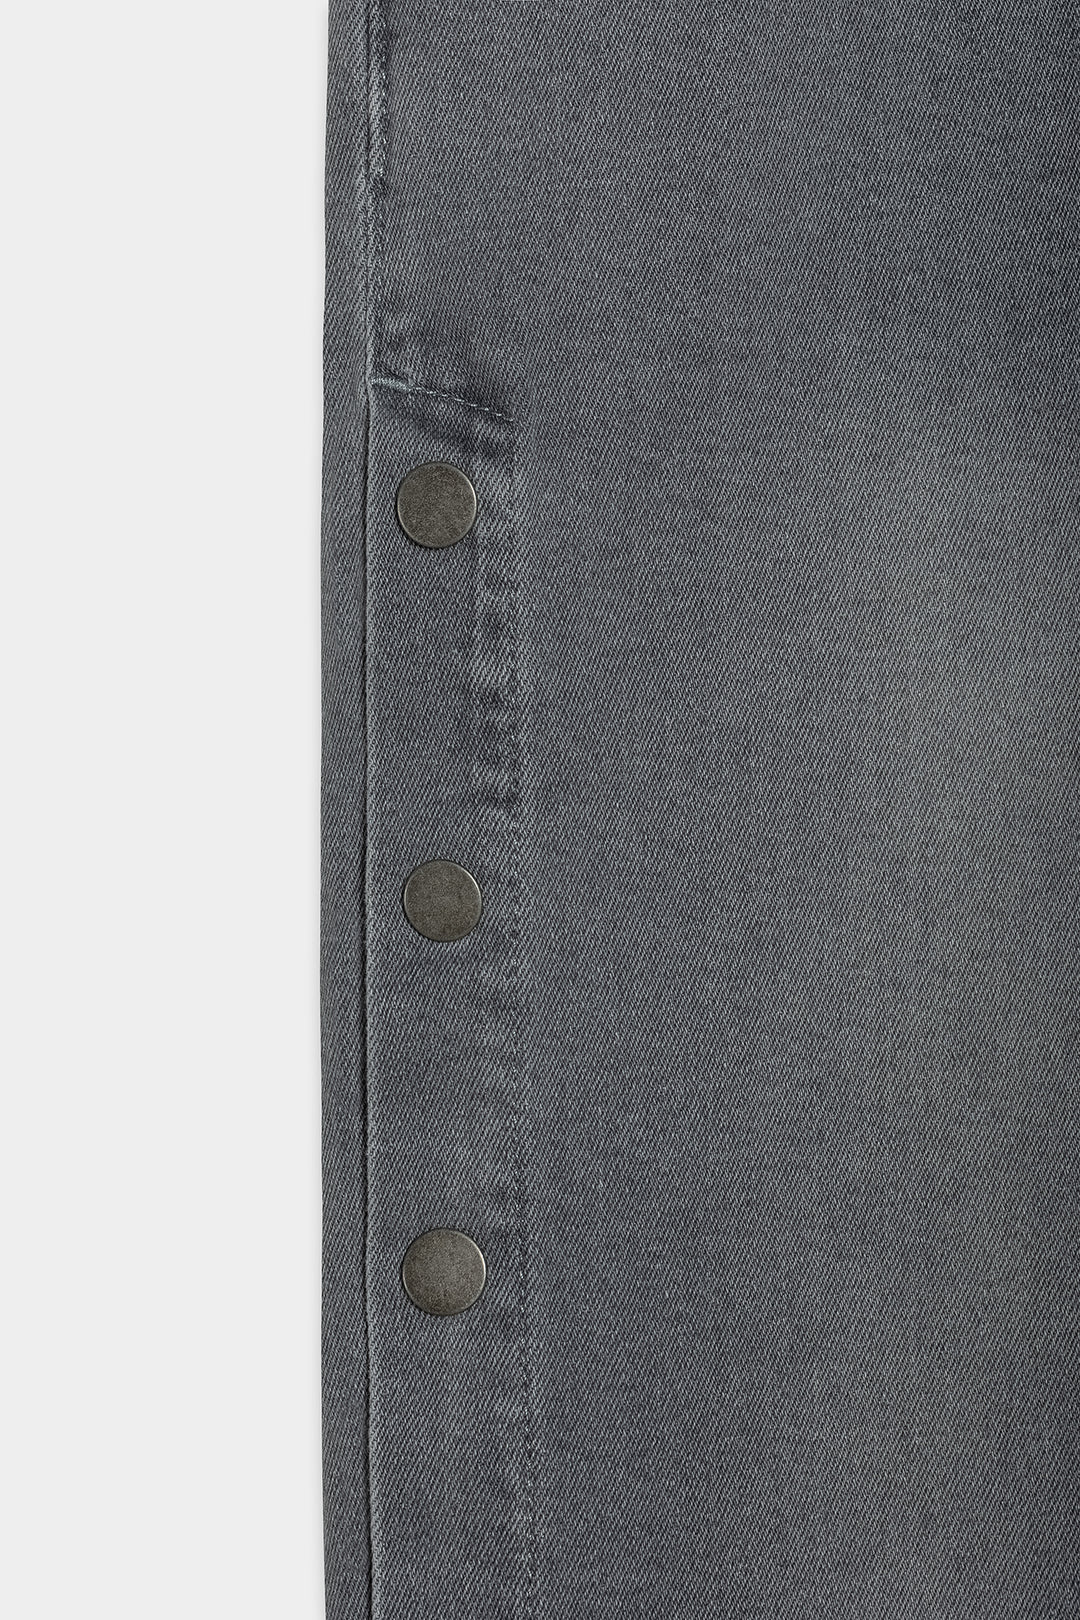 SIDE BUTTON JEANS